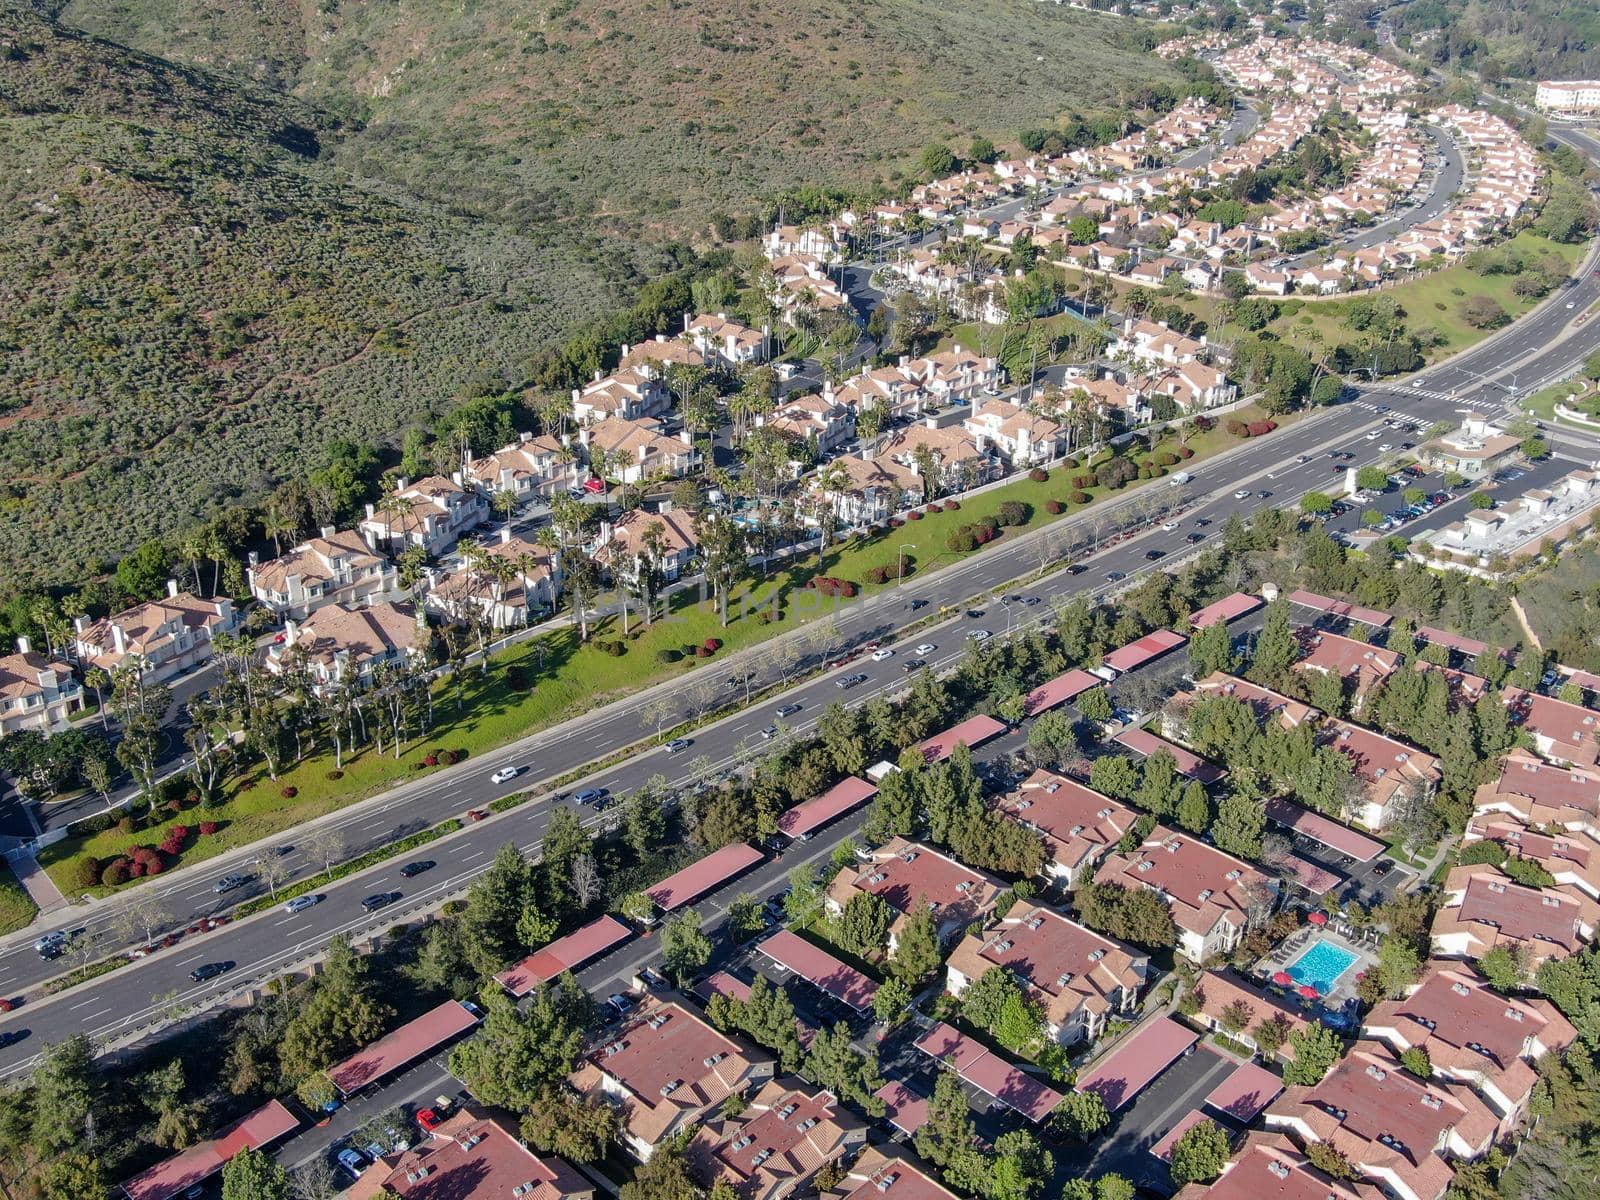 Aerial view of upper middle class neighborhood with big villas around in San Diego by Bonandbon